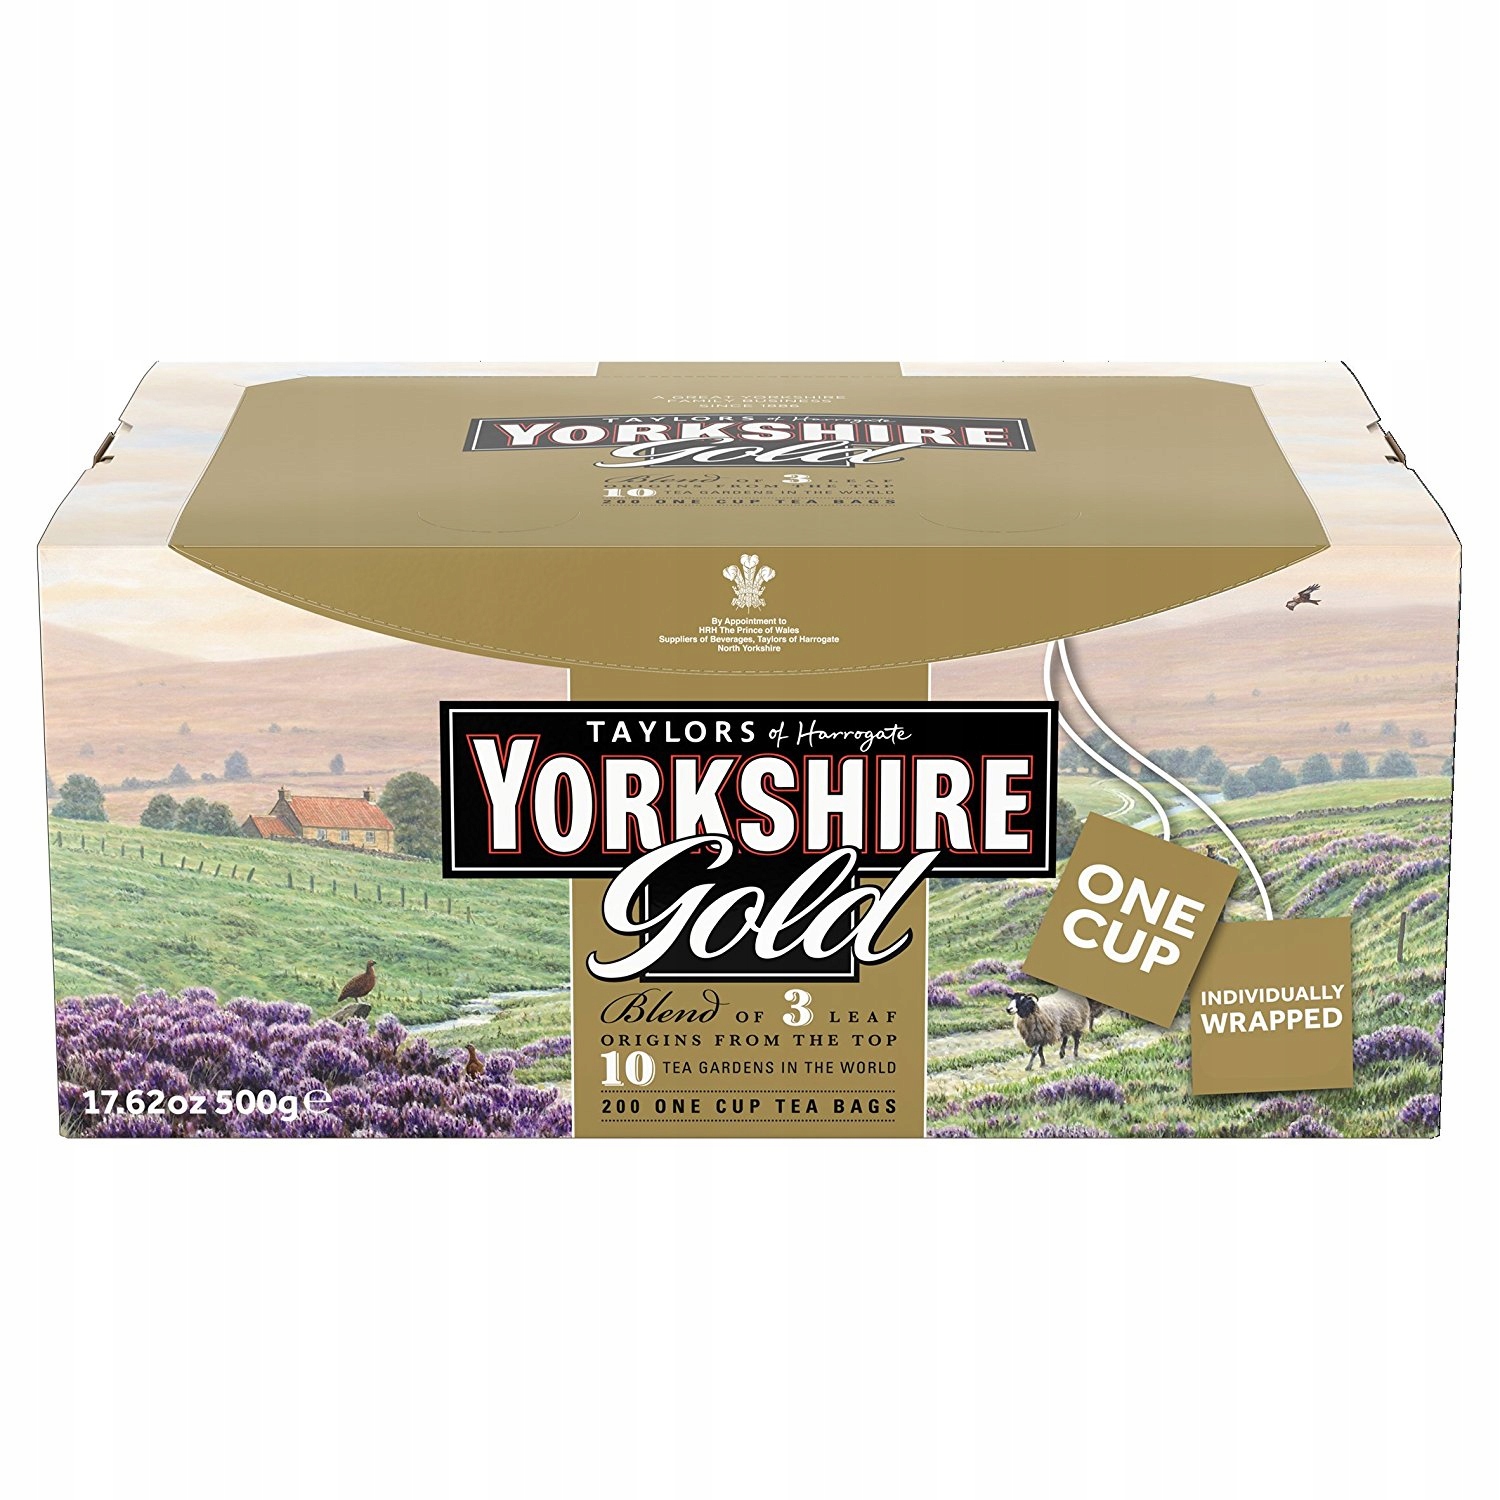 Yorkshire gold how to use gift cards on ebay